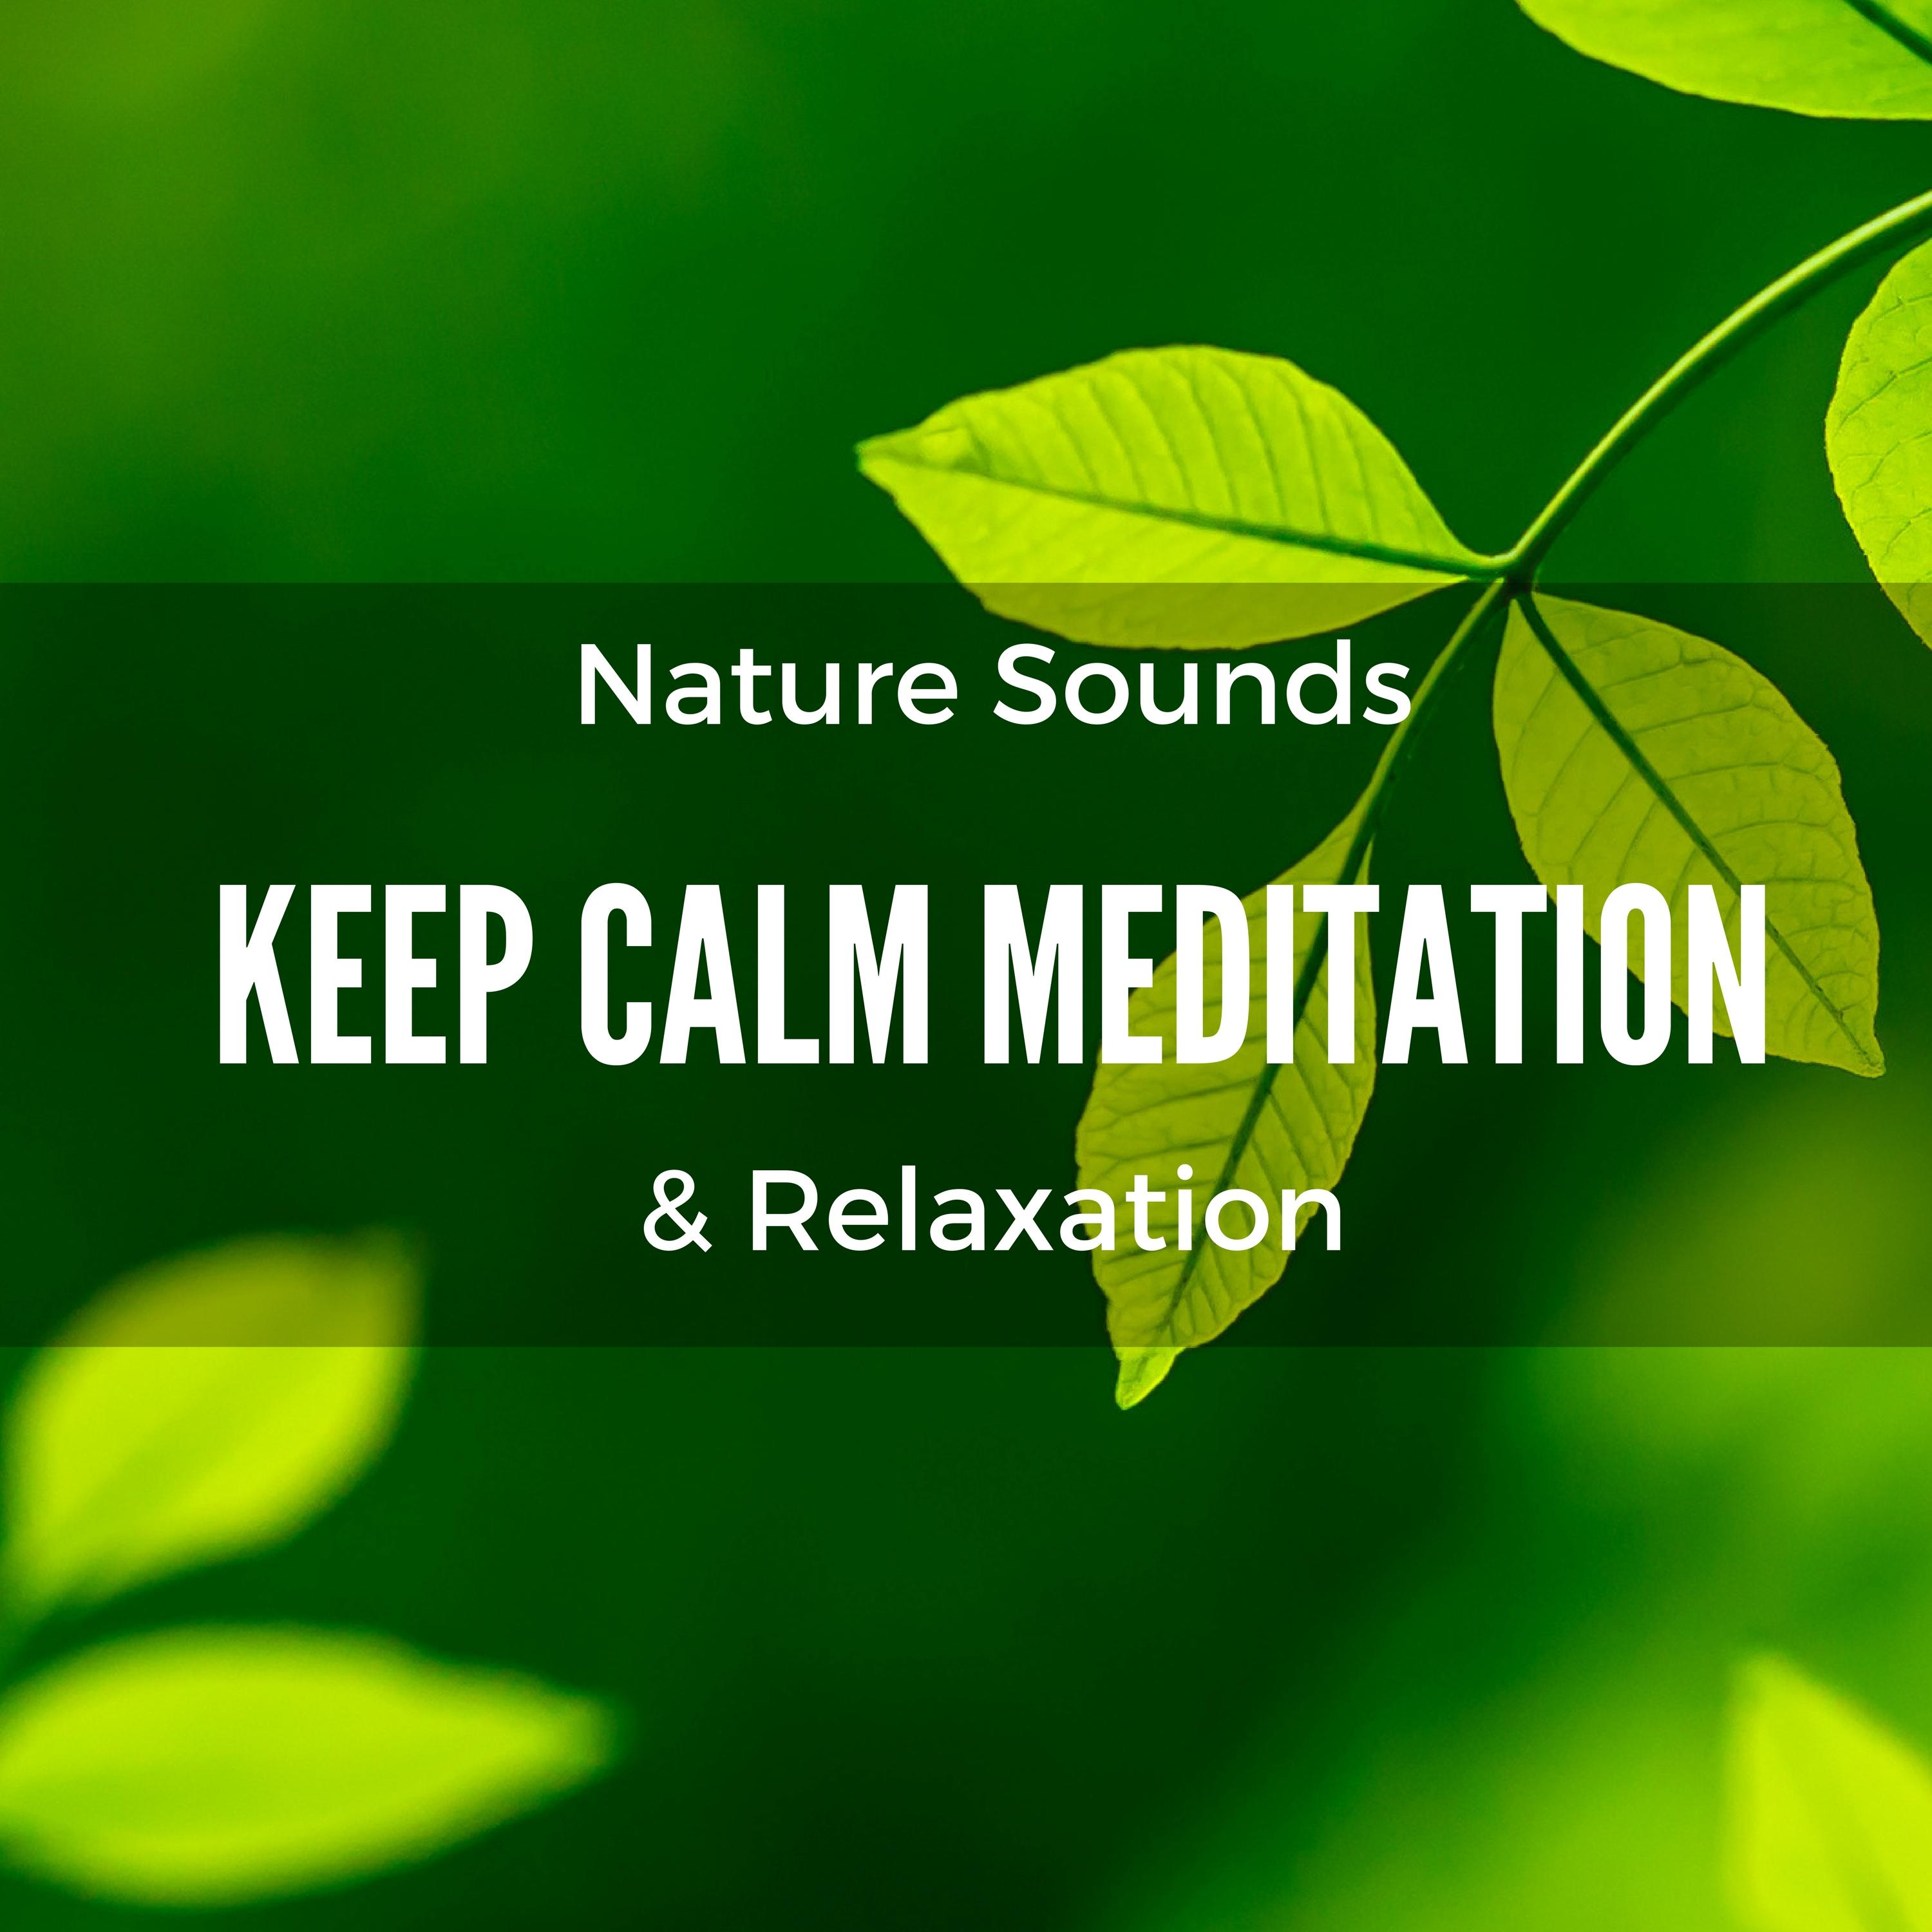 Keep Calm Meditation & Relaxation: Water Sounds, Soothing Music with Nature Sounds for Inner Peace & Healing Massage